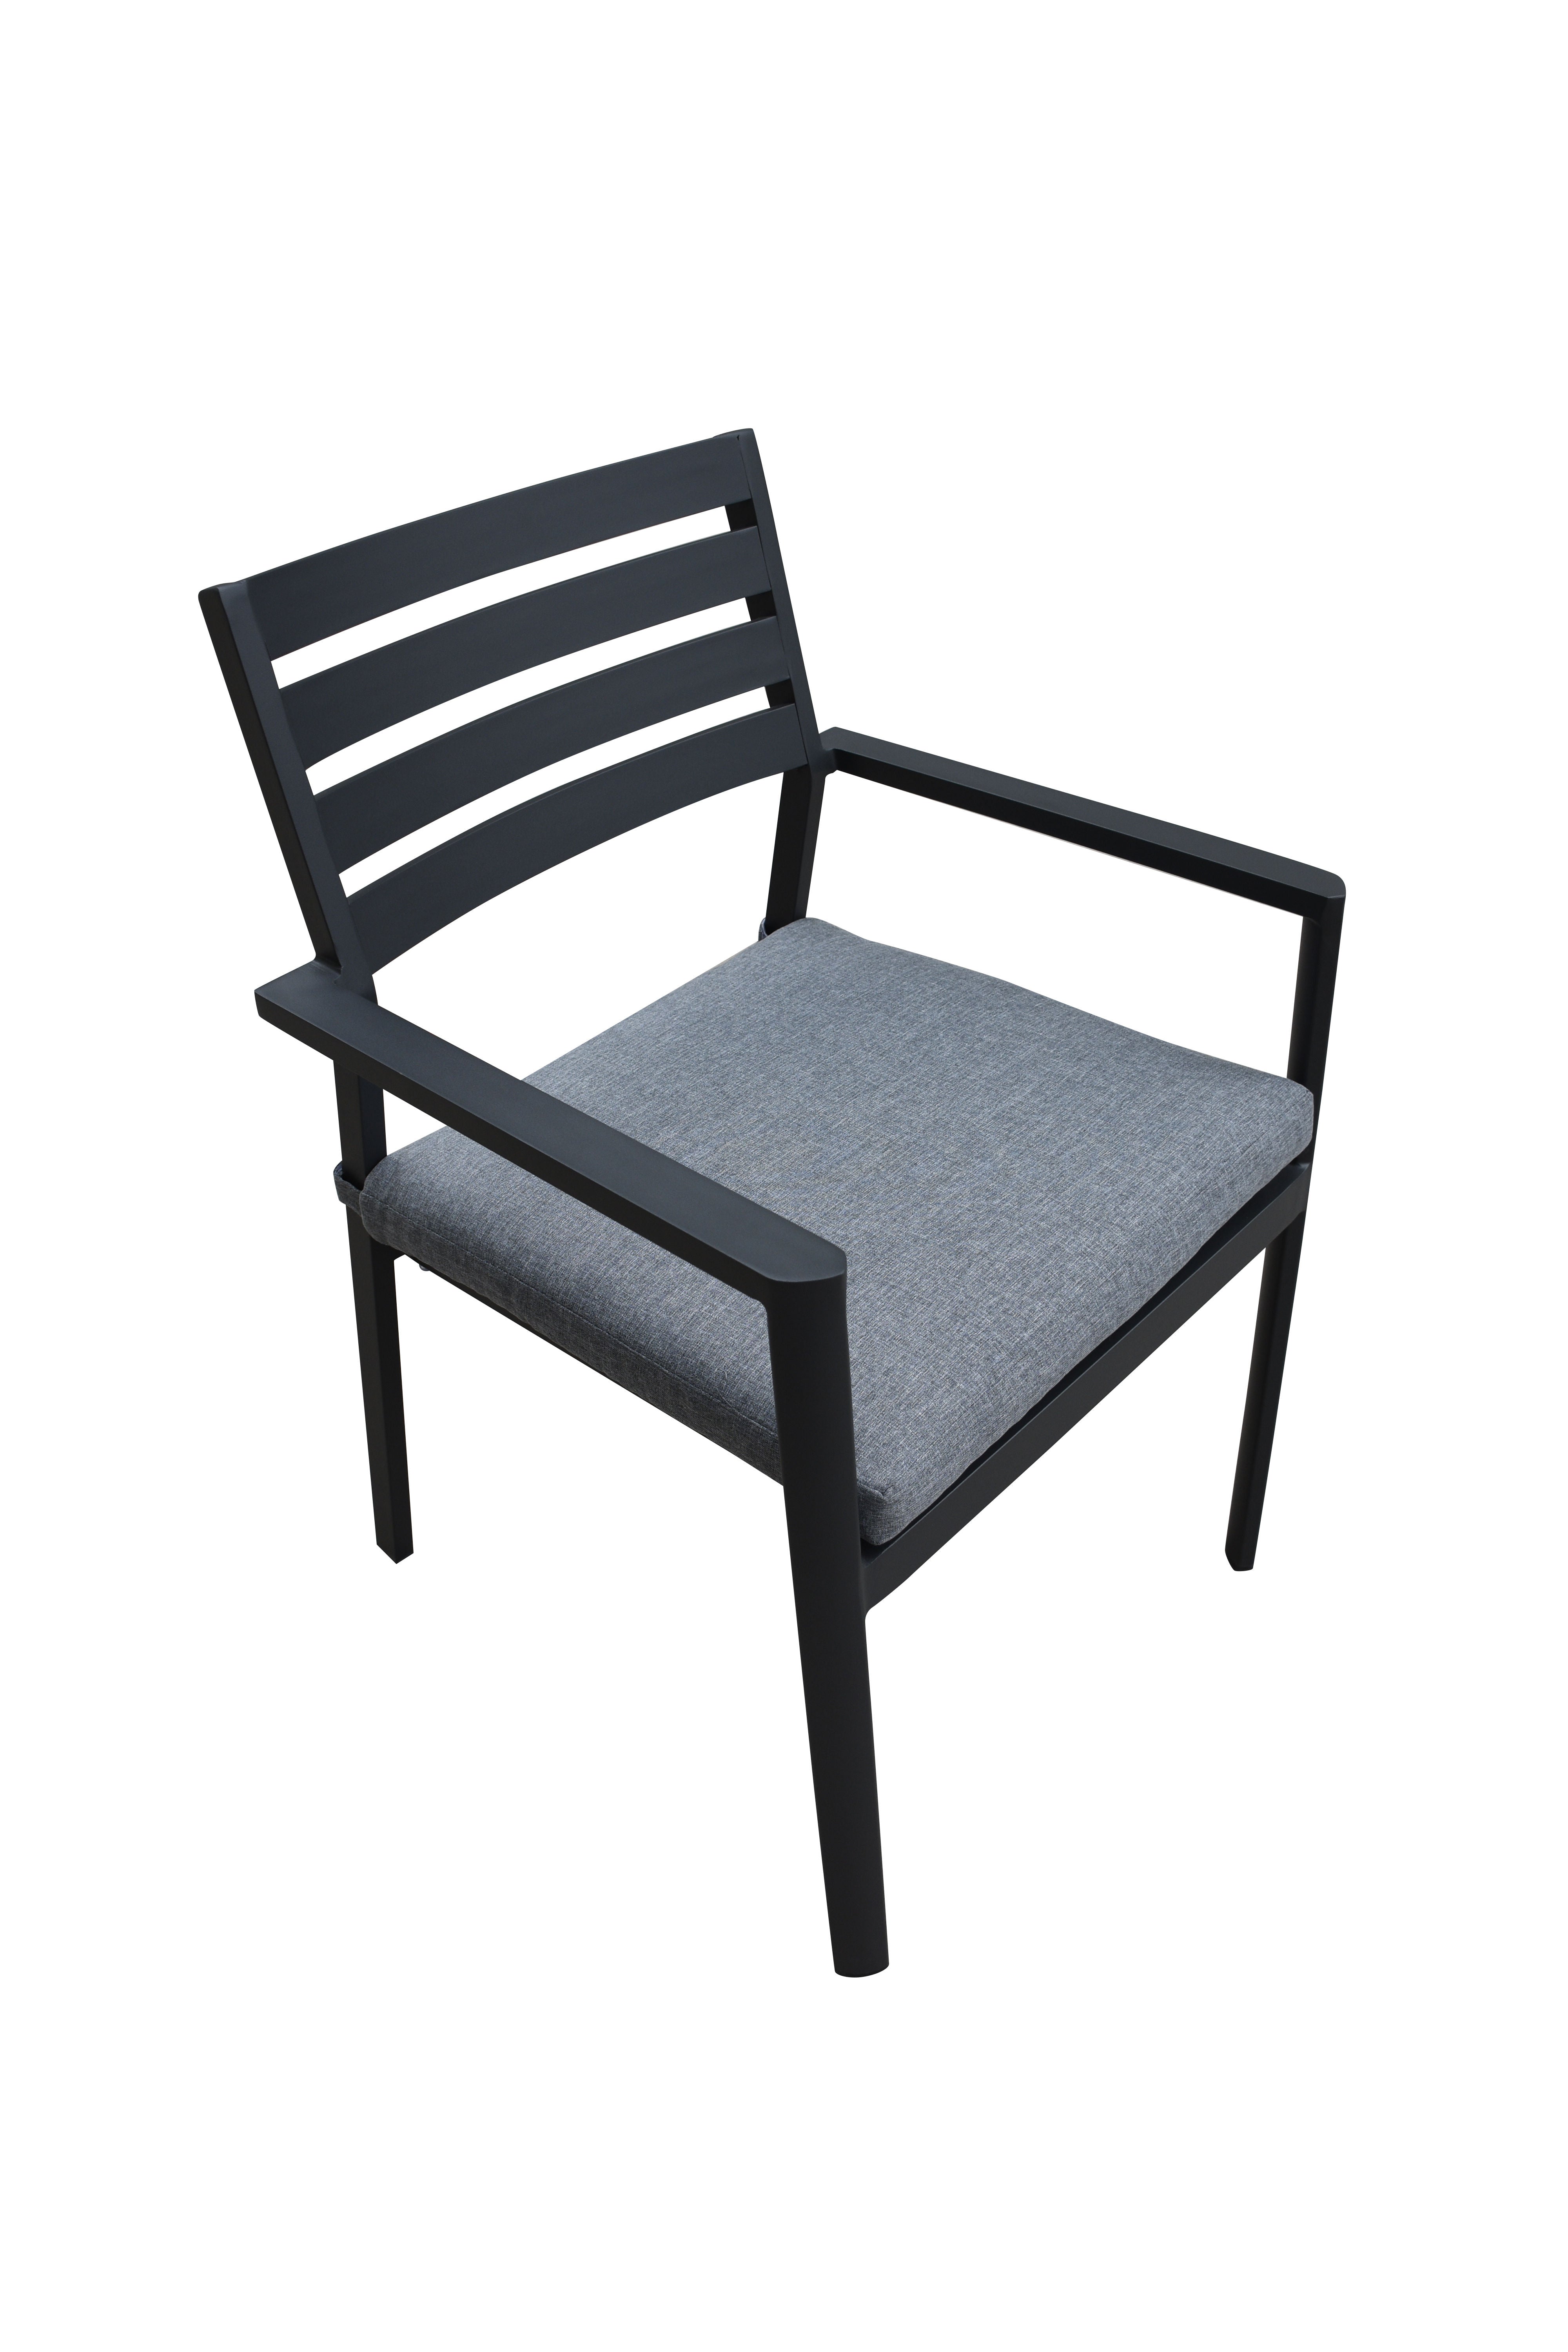 PatioZone Stackable Chair with 2" Thick Olefin Cushion and Aluminium Slats (MOSS-0817C) - Charcoal / Heather Grey